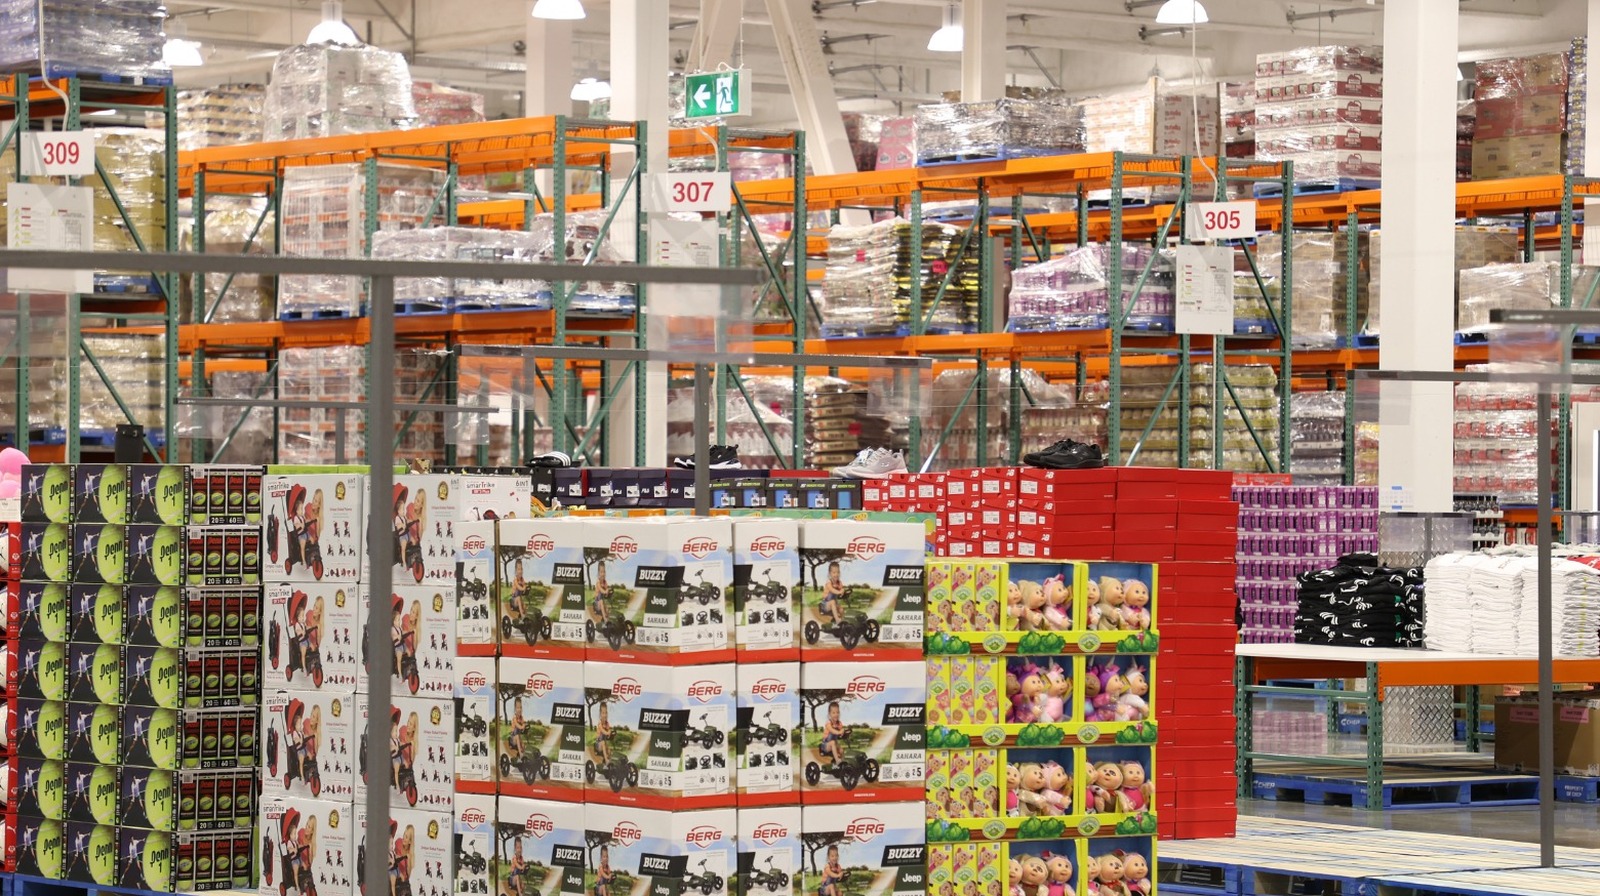 https://www.thedailymeal.com/img/gallery/12-things-you-should-avoid-buying-at-costco/l-intro-1674663576.jpg